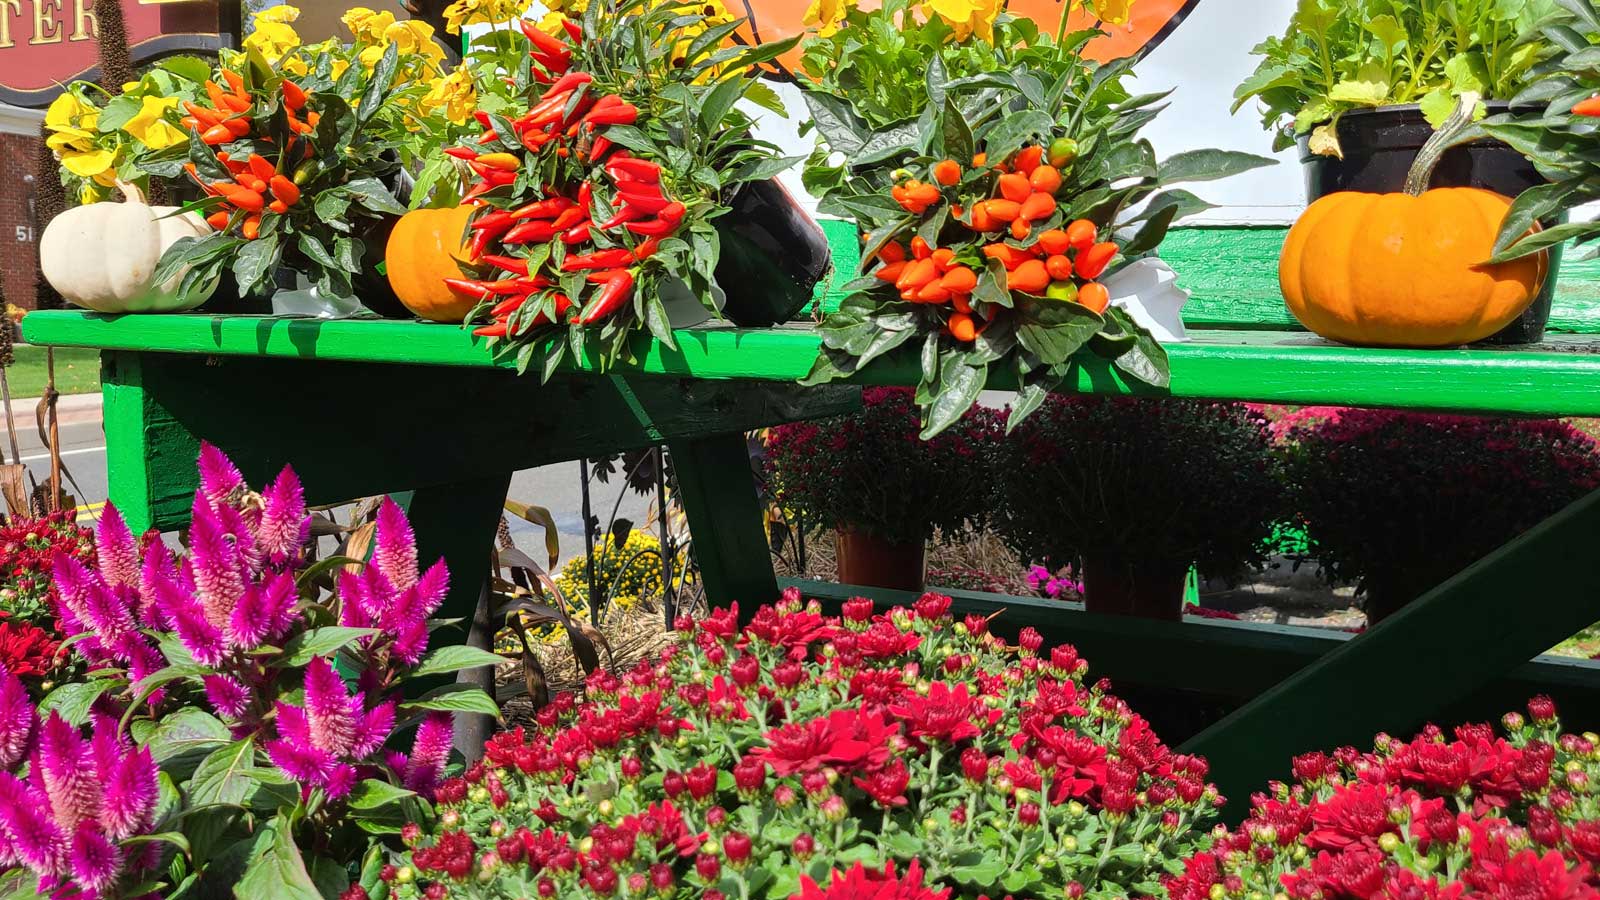 Ornamental Peppers and Pumpkins